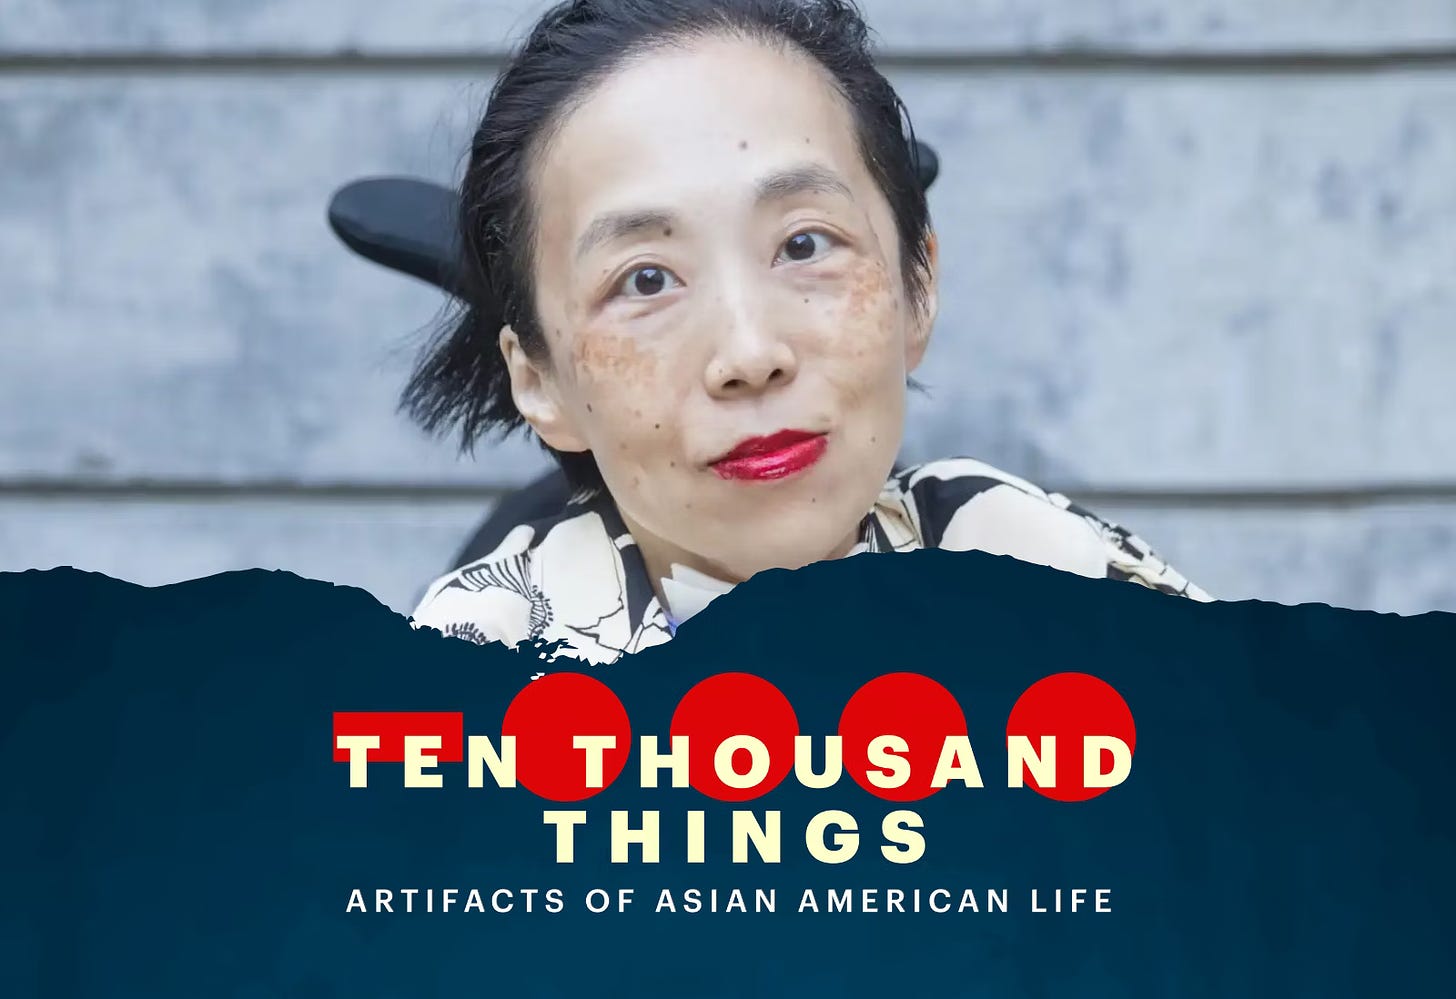 Photo of Alice Wong, an Asian American woman with shiny, red lipstick and wearing a black and white floral pattern shirt, in a motorized wheelchair, with the logo of the podcast Ten Thousand Things overlaid on the bottom half of the photo with the text Artifacts of Asian American Life